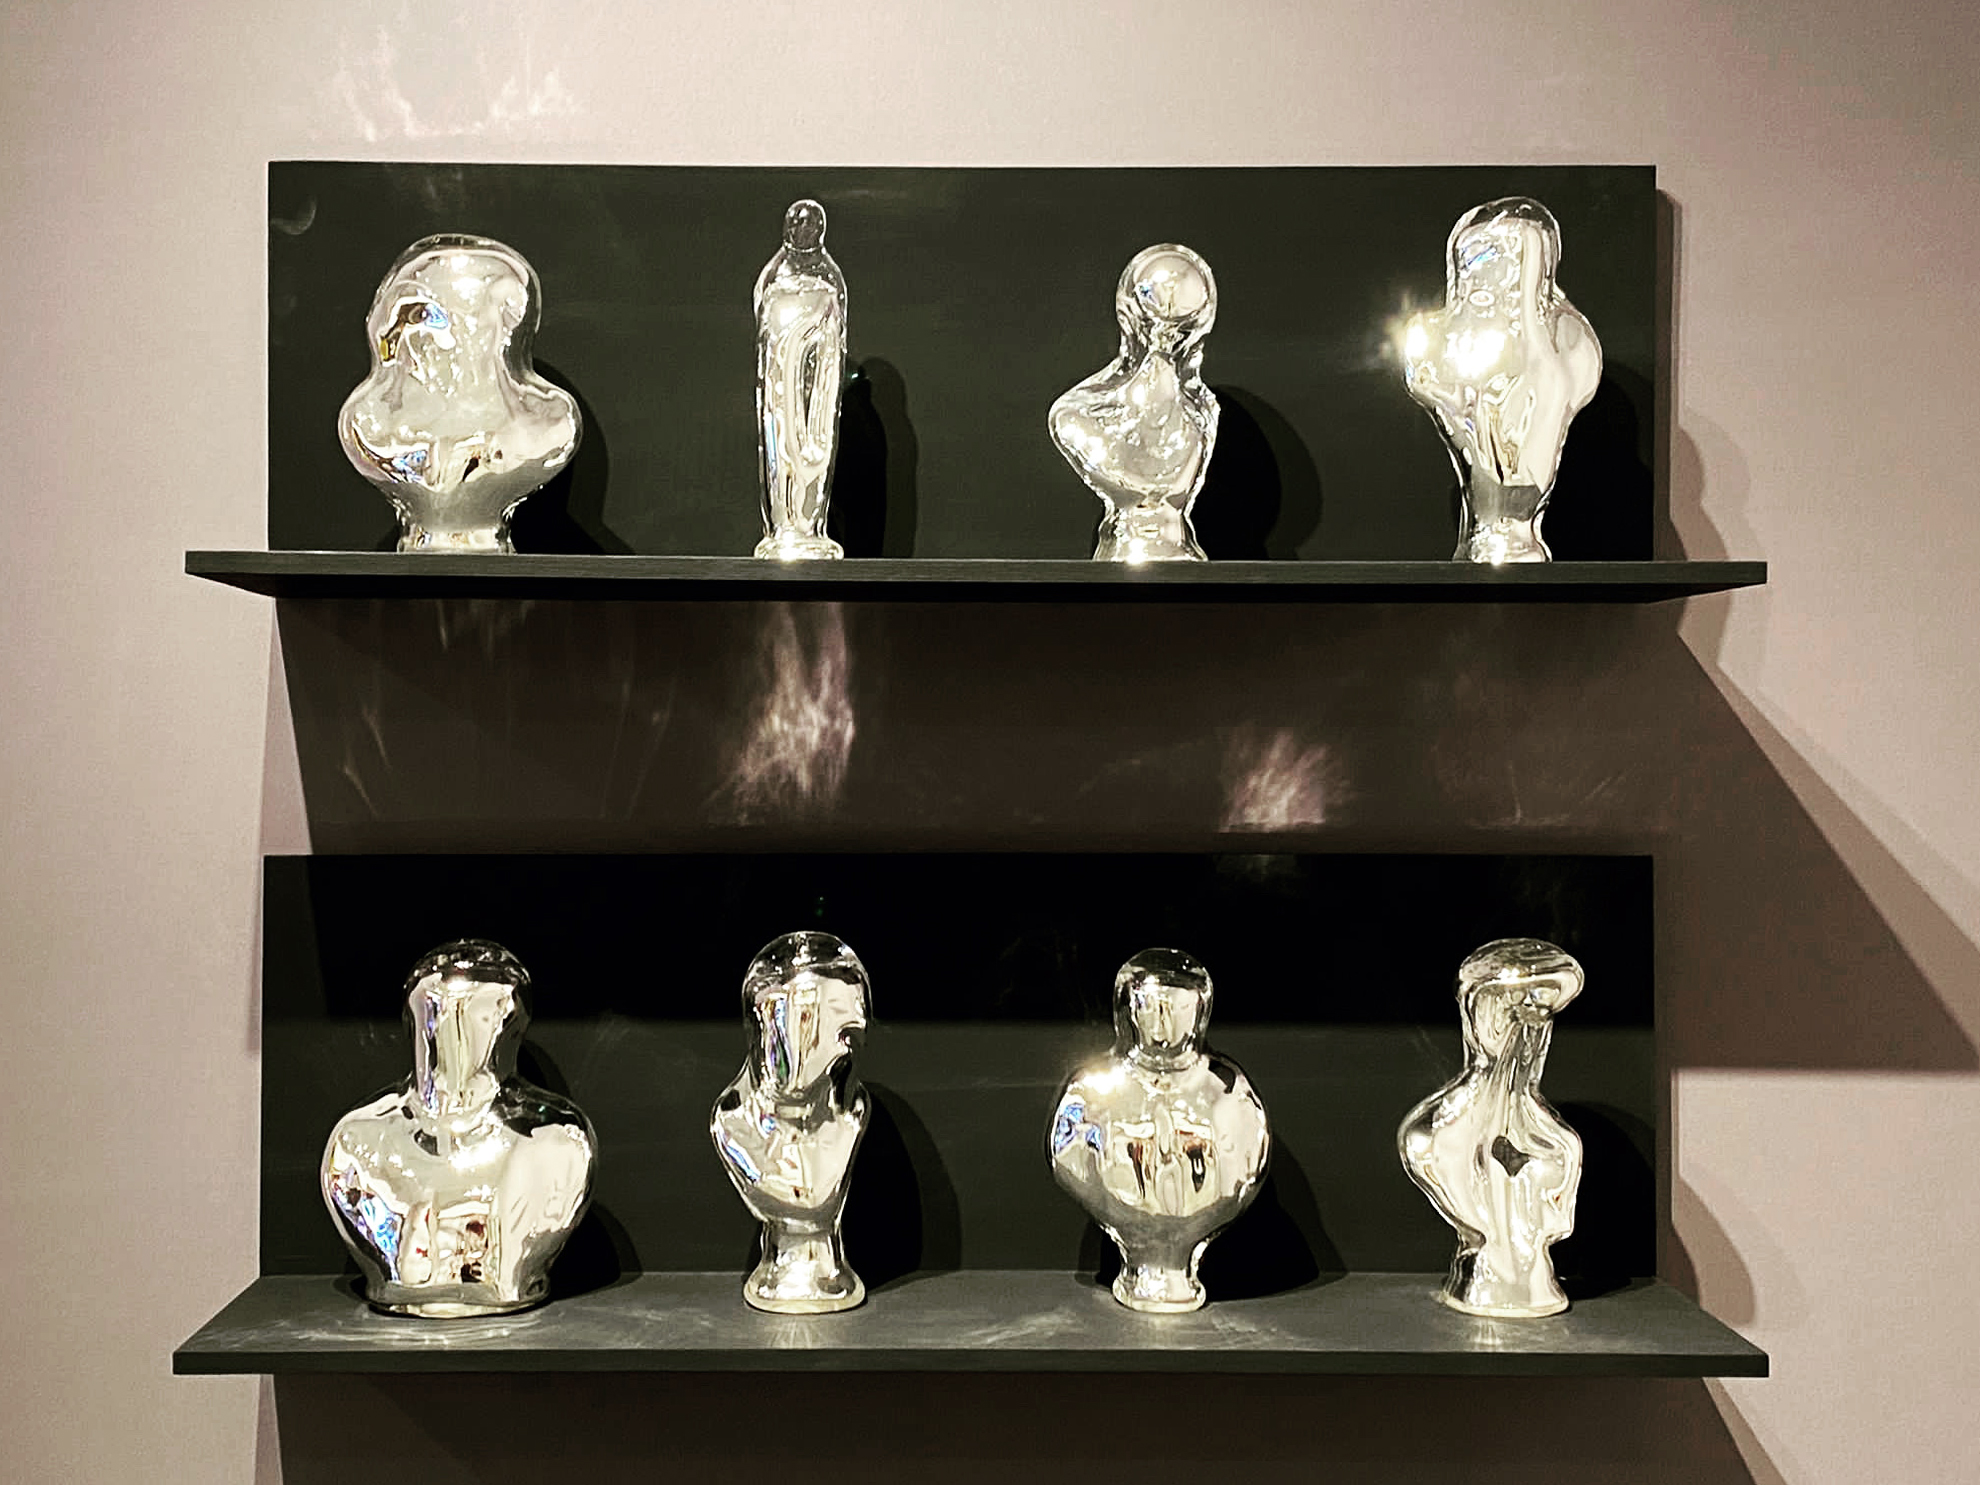 distorted busts made of silvered glass, on black shelves